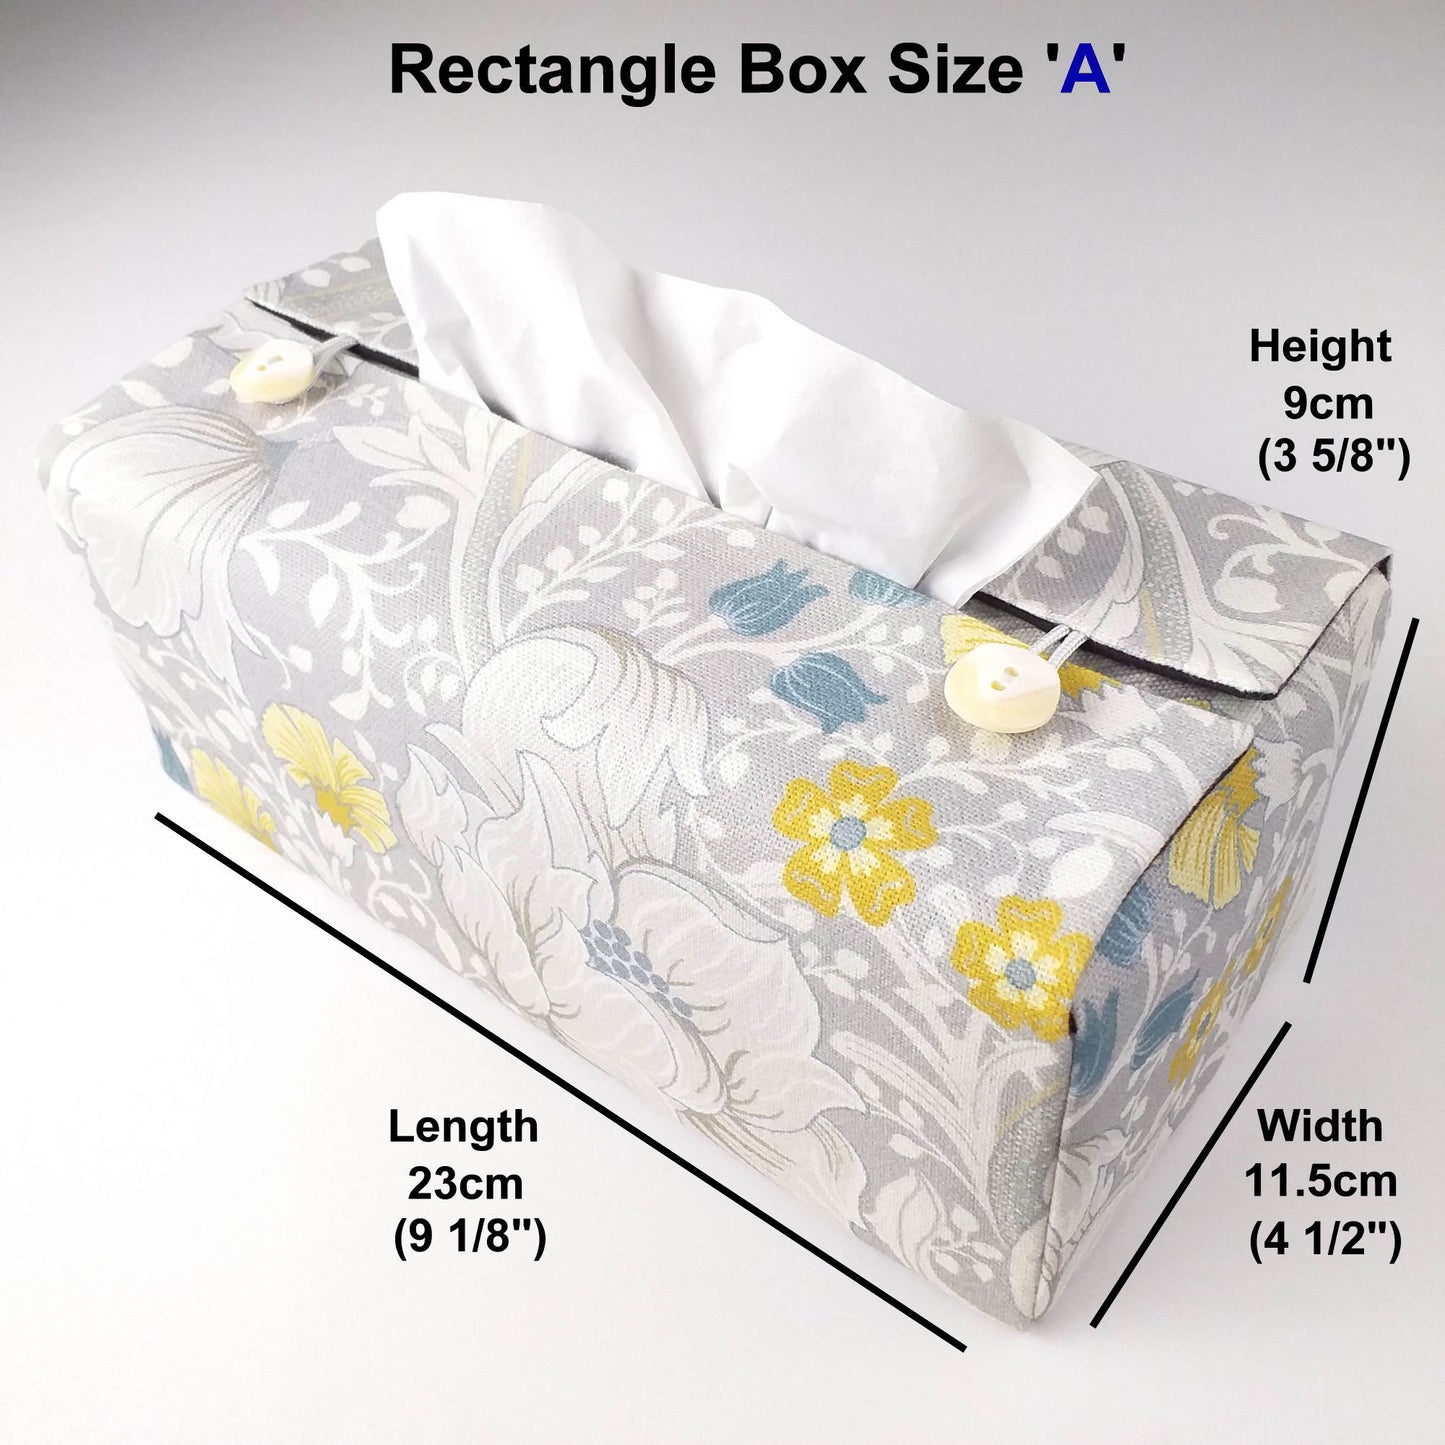 Rectangle tissue box cover with white magnolia flowers design with blue, yellow, and grey accents